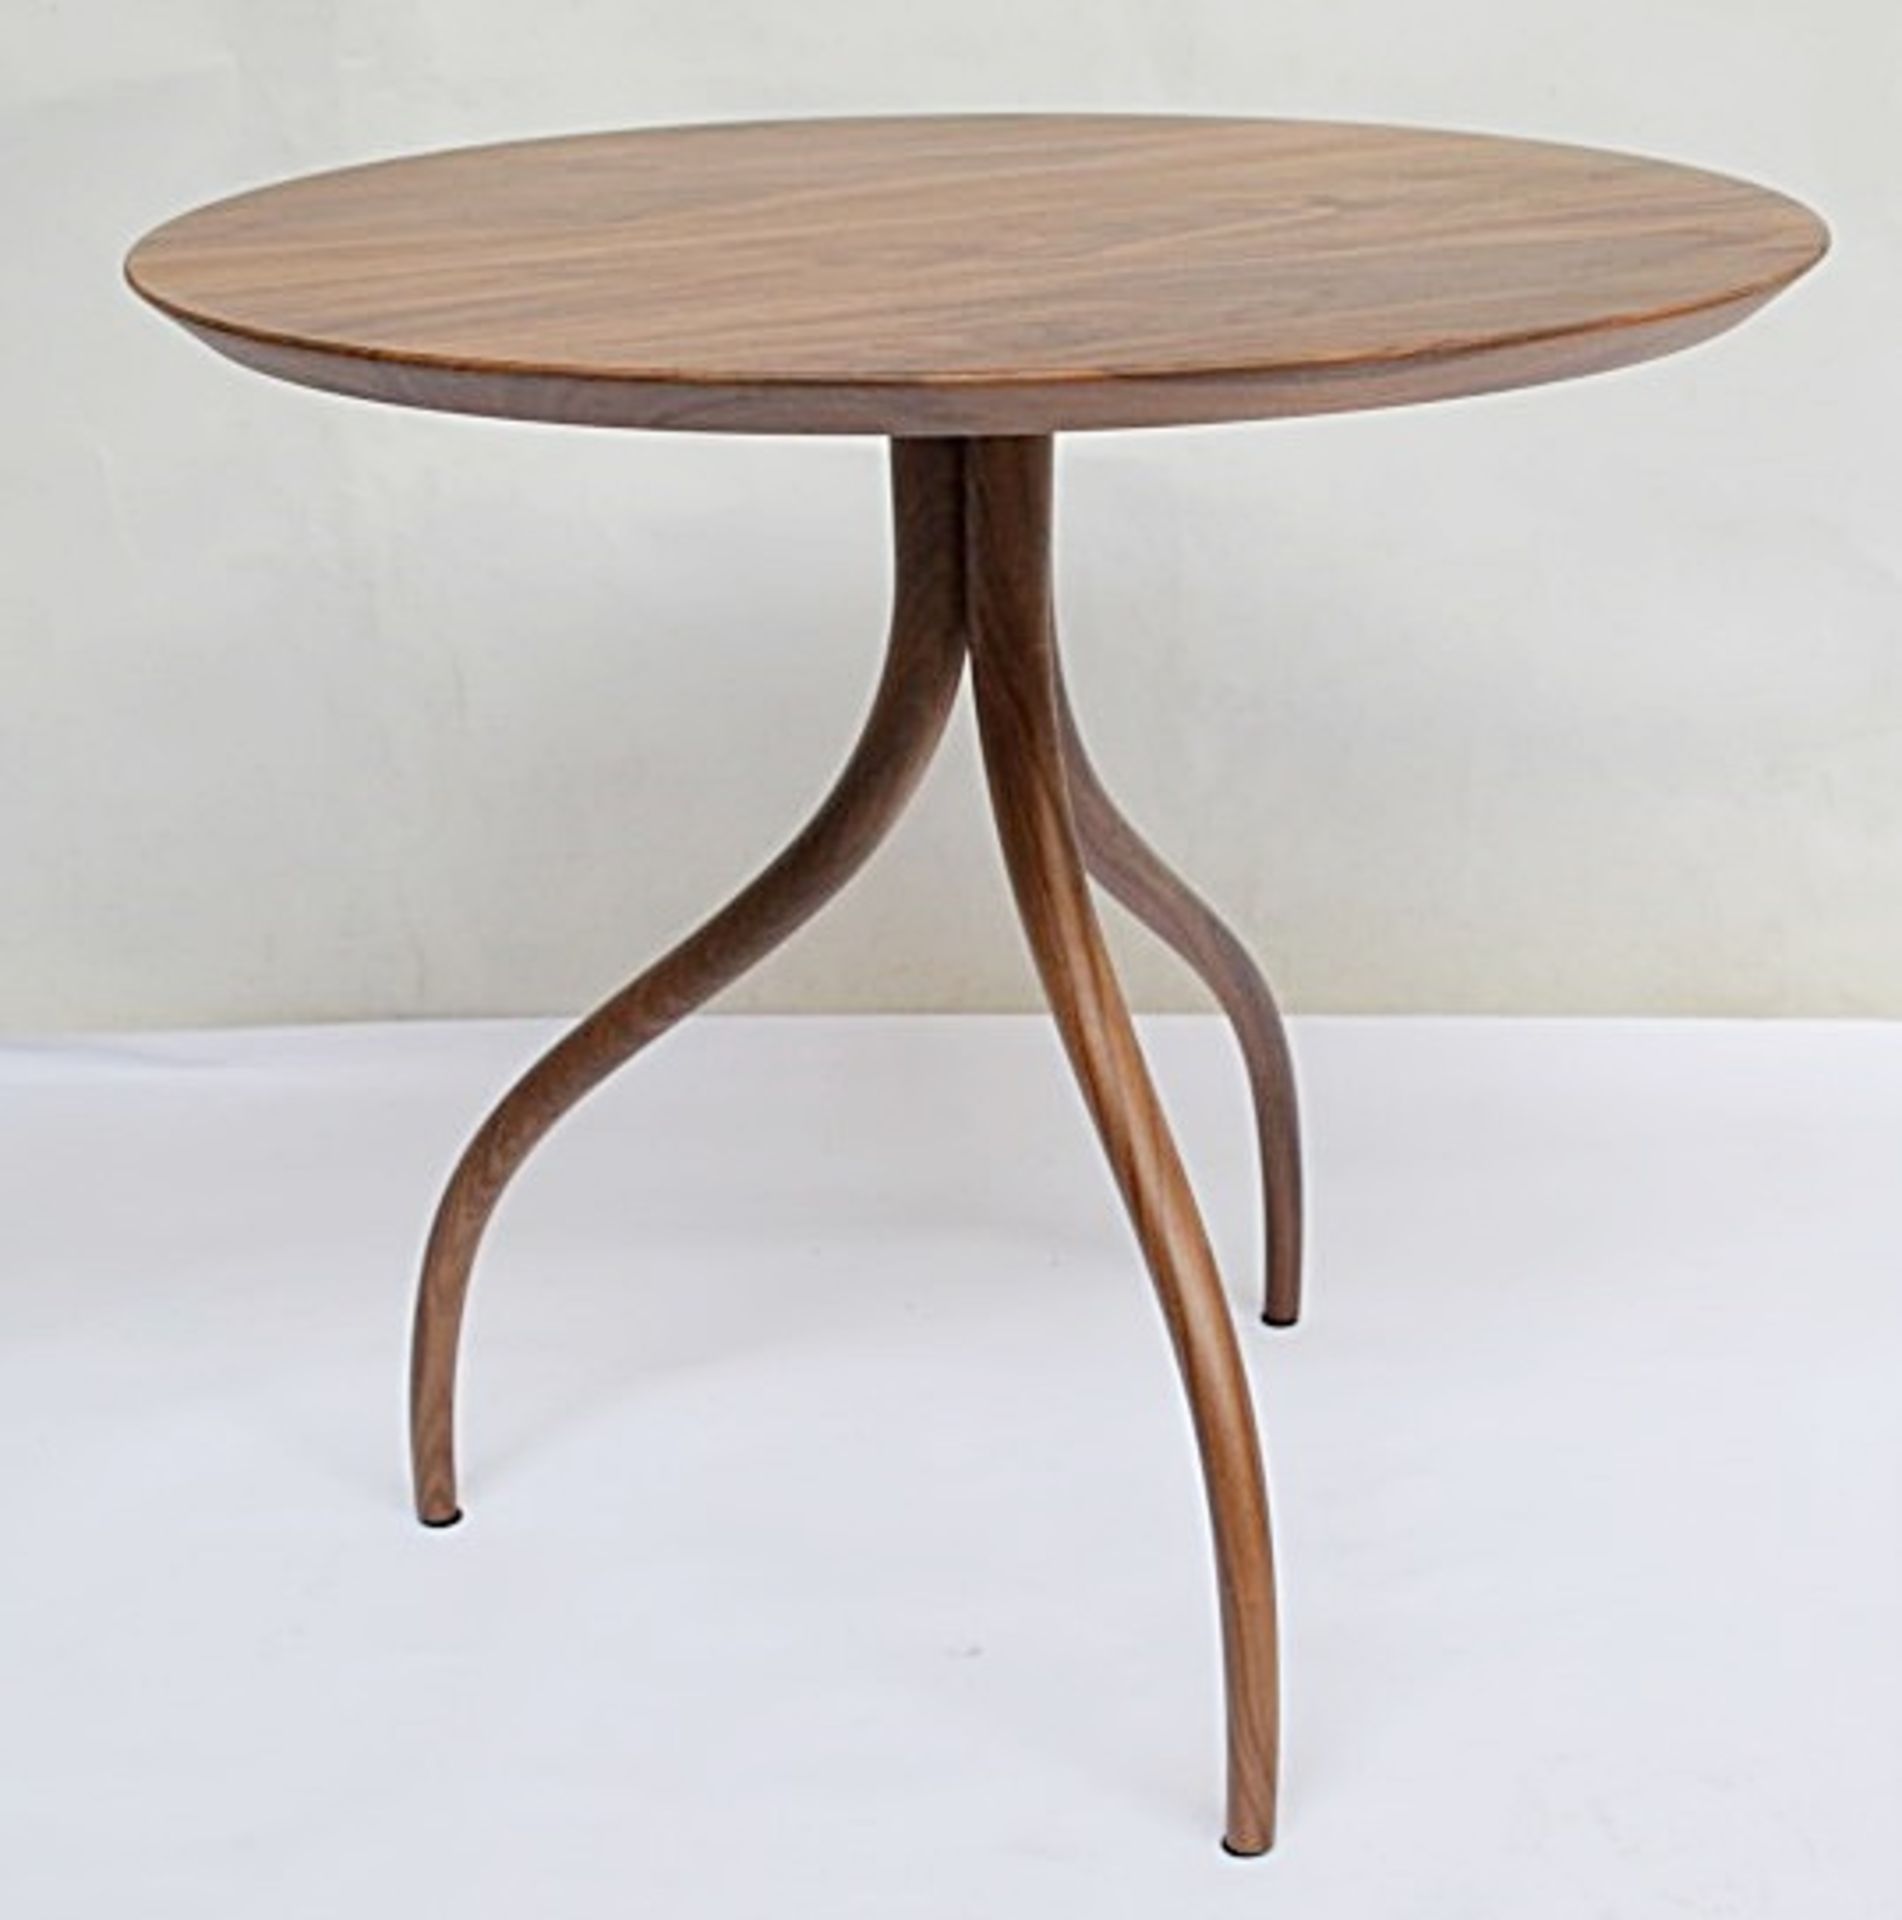 1 x LIGNE ROSET Occasional Table In Walnut - Designed By Pierre Paulin - Dimensions: H50 x Diameter: - Image 2 of 7